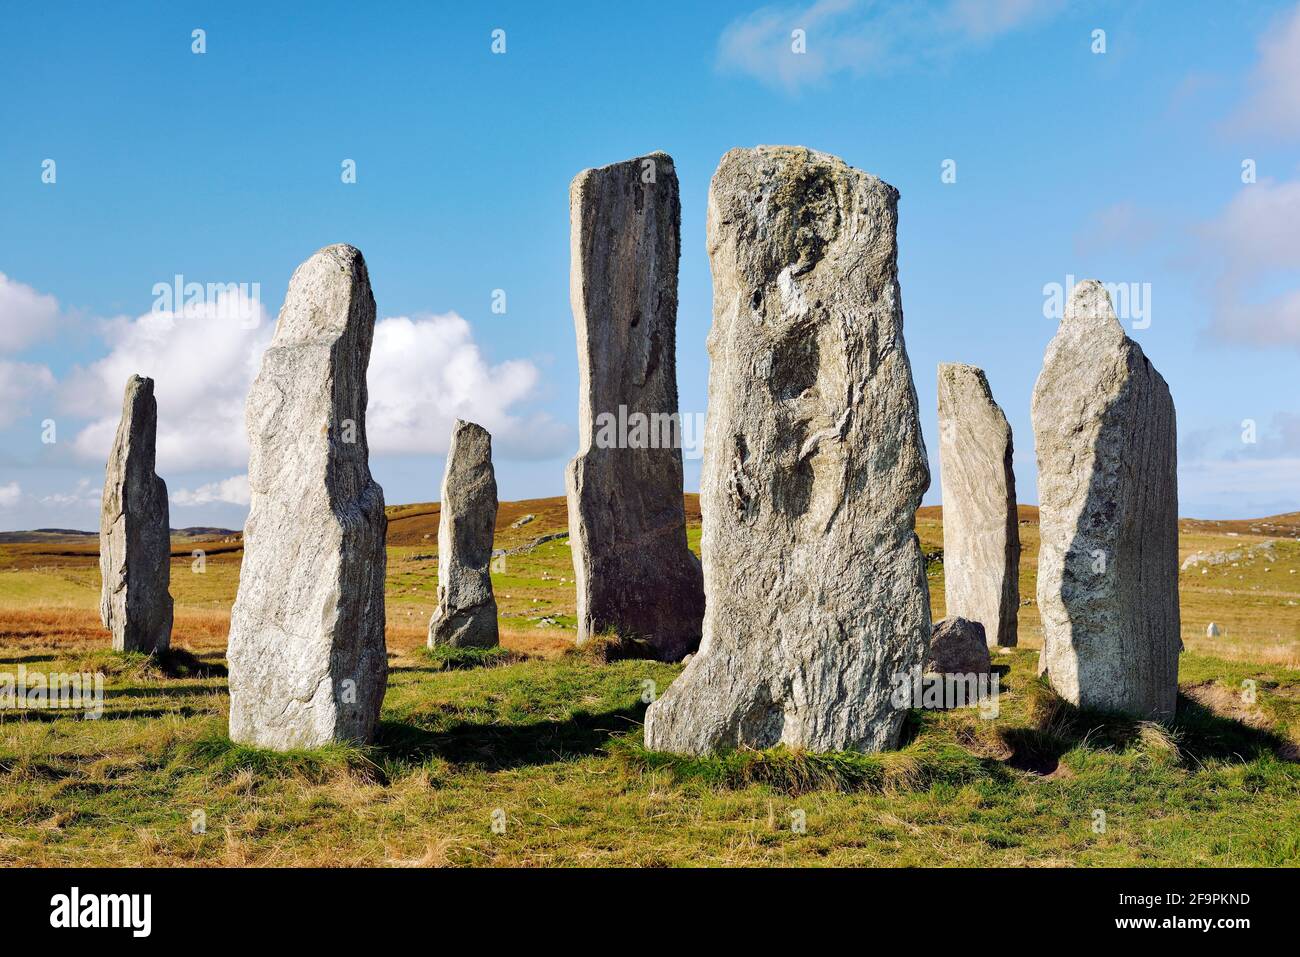 Tursachan prehistoric Neolithic stones at Callanish, Isle of Lewis, Scotland. aka Callanish I. The tall central monolith and part of the core circle Stock Photo